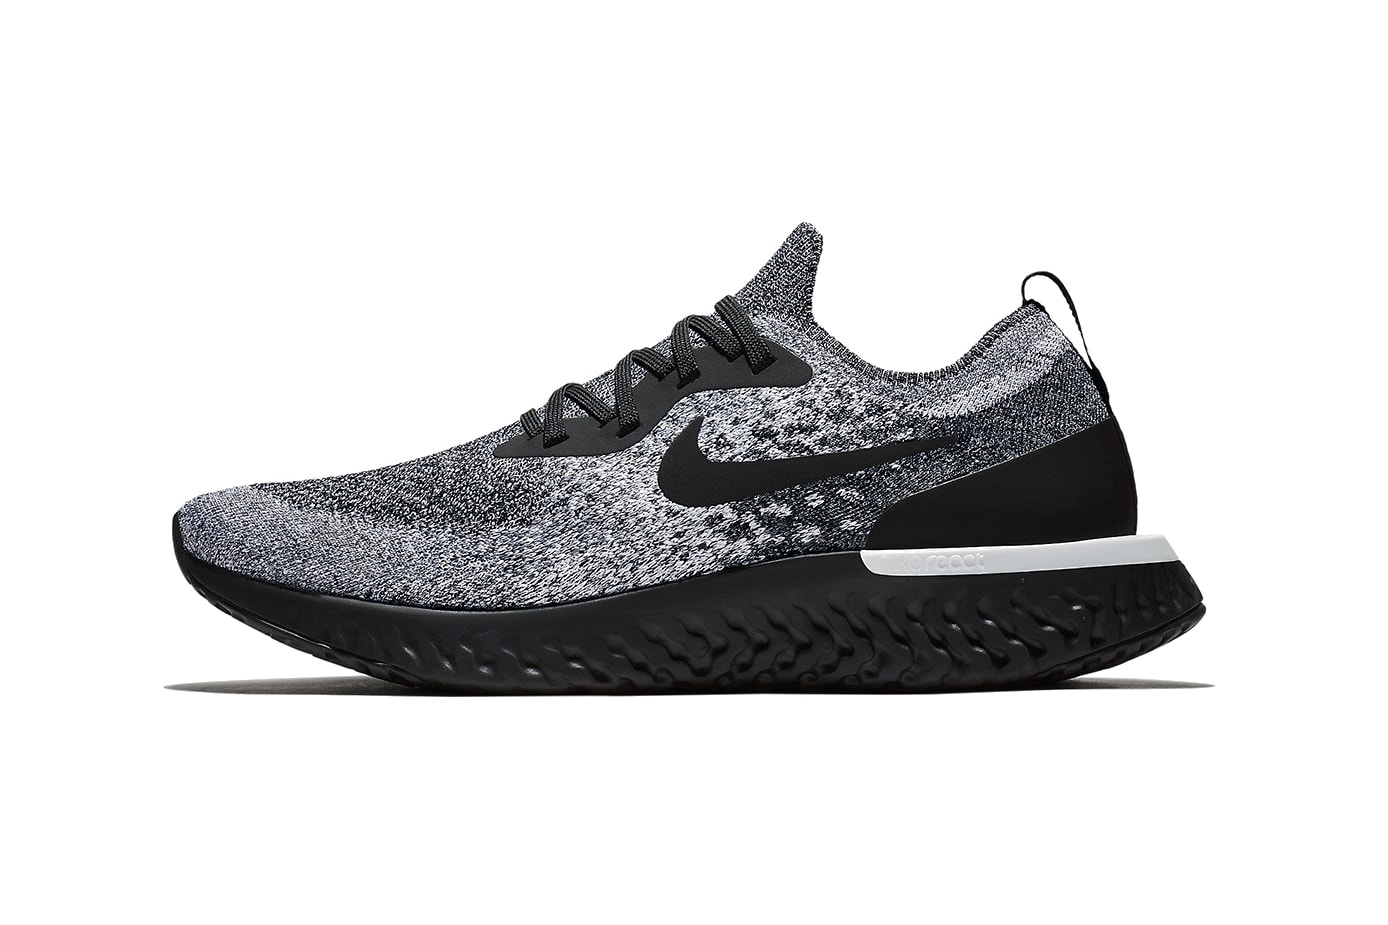 Nike Epic React Flyknit "Cookies and Cream"